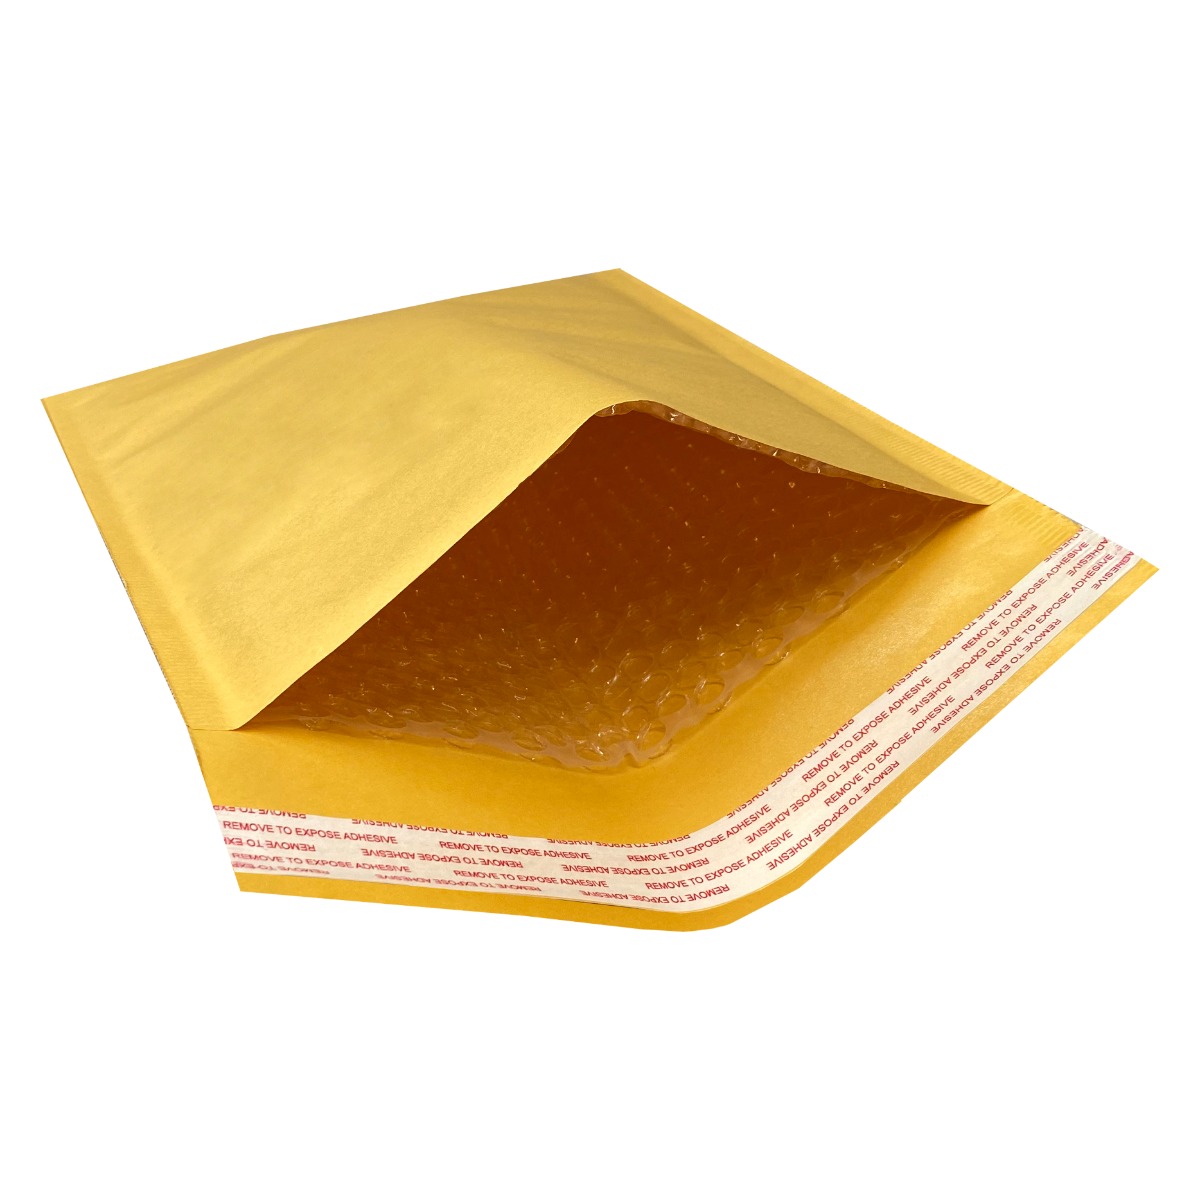 ALL SIZES Golden Bubble Padded Mailers GOLD Envelopes Bags secure safe packaging 